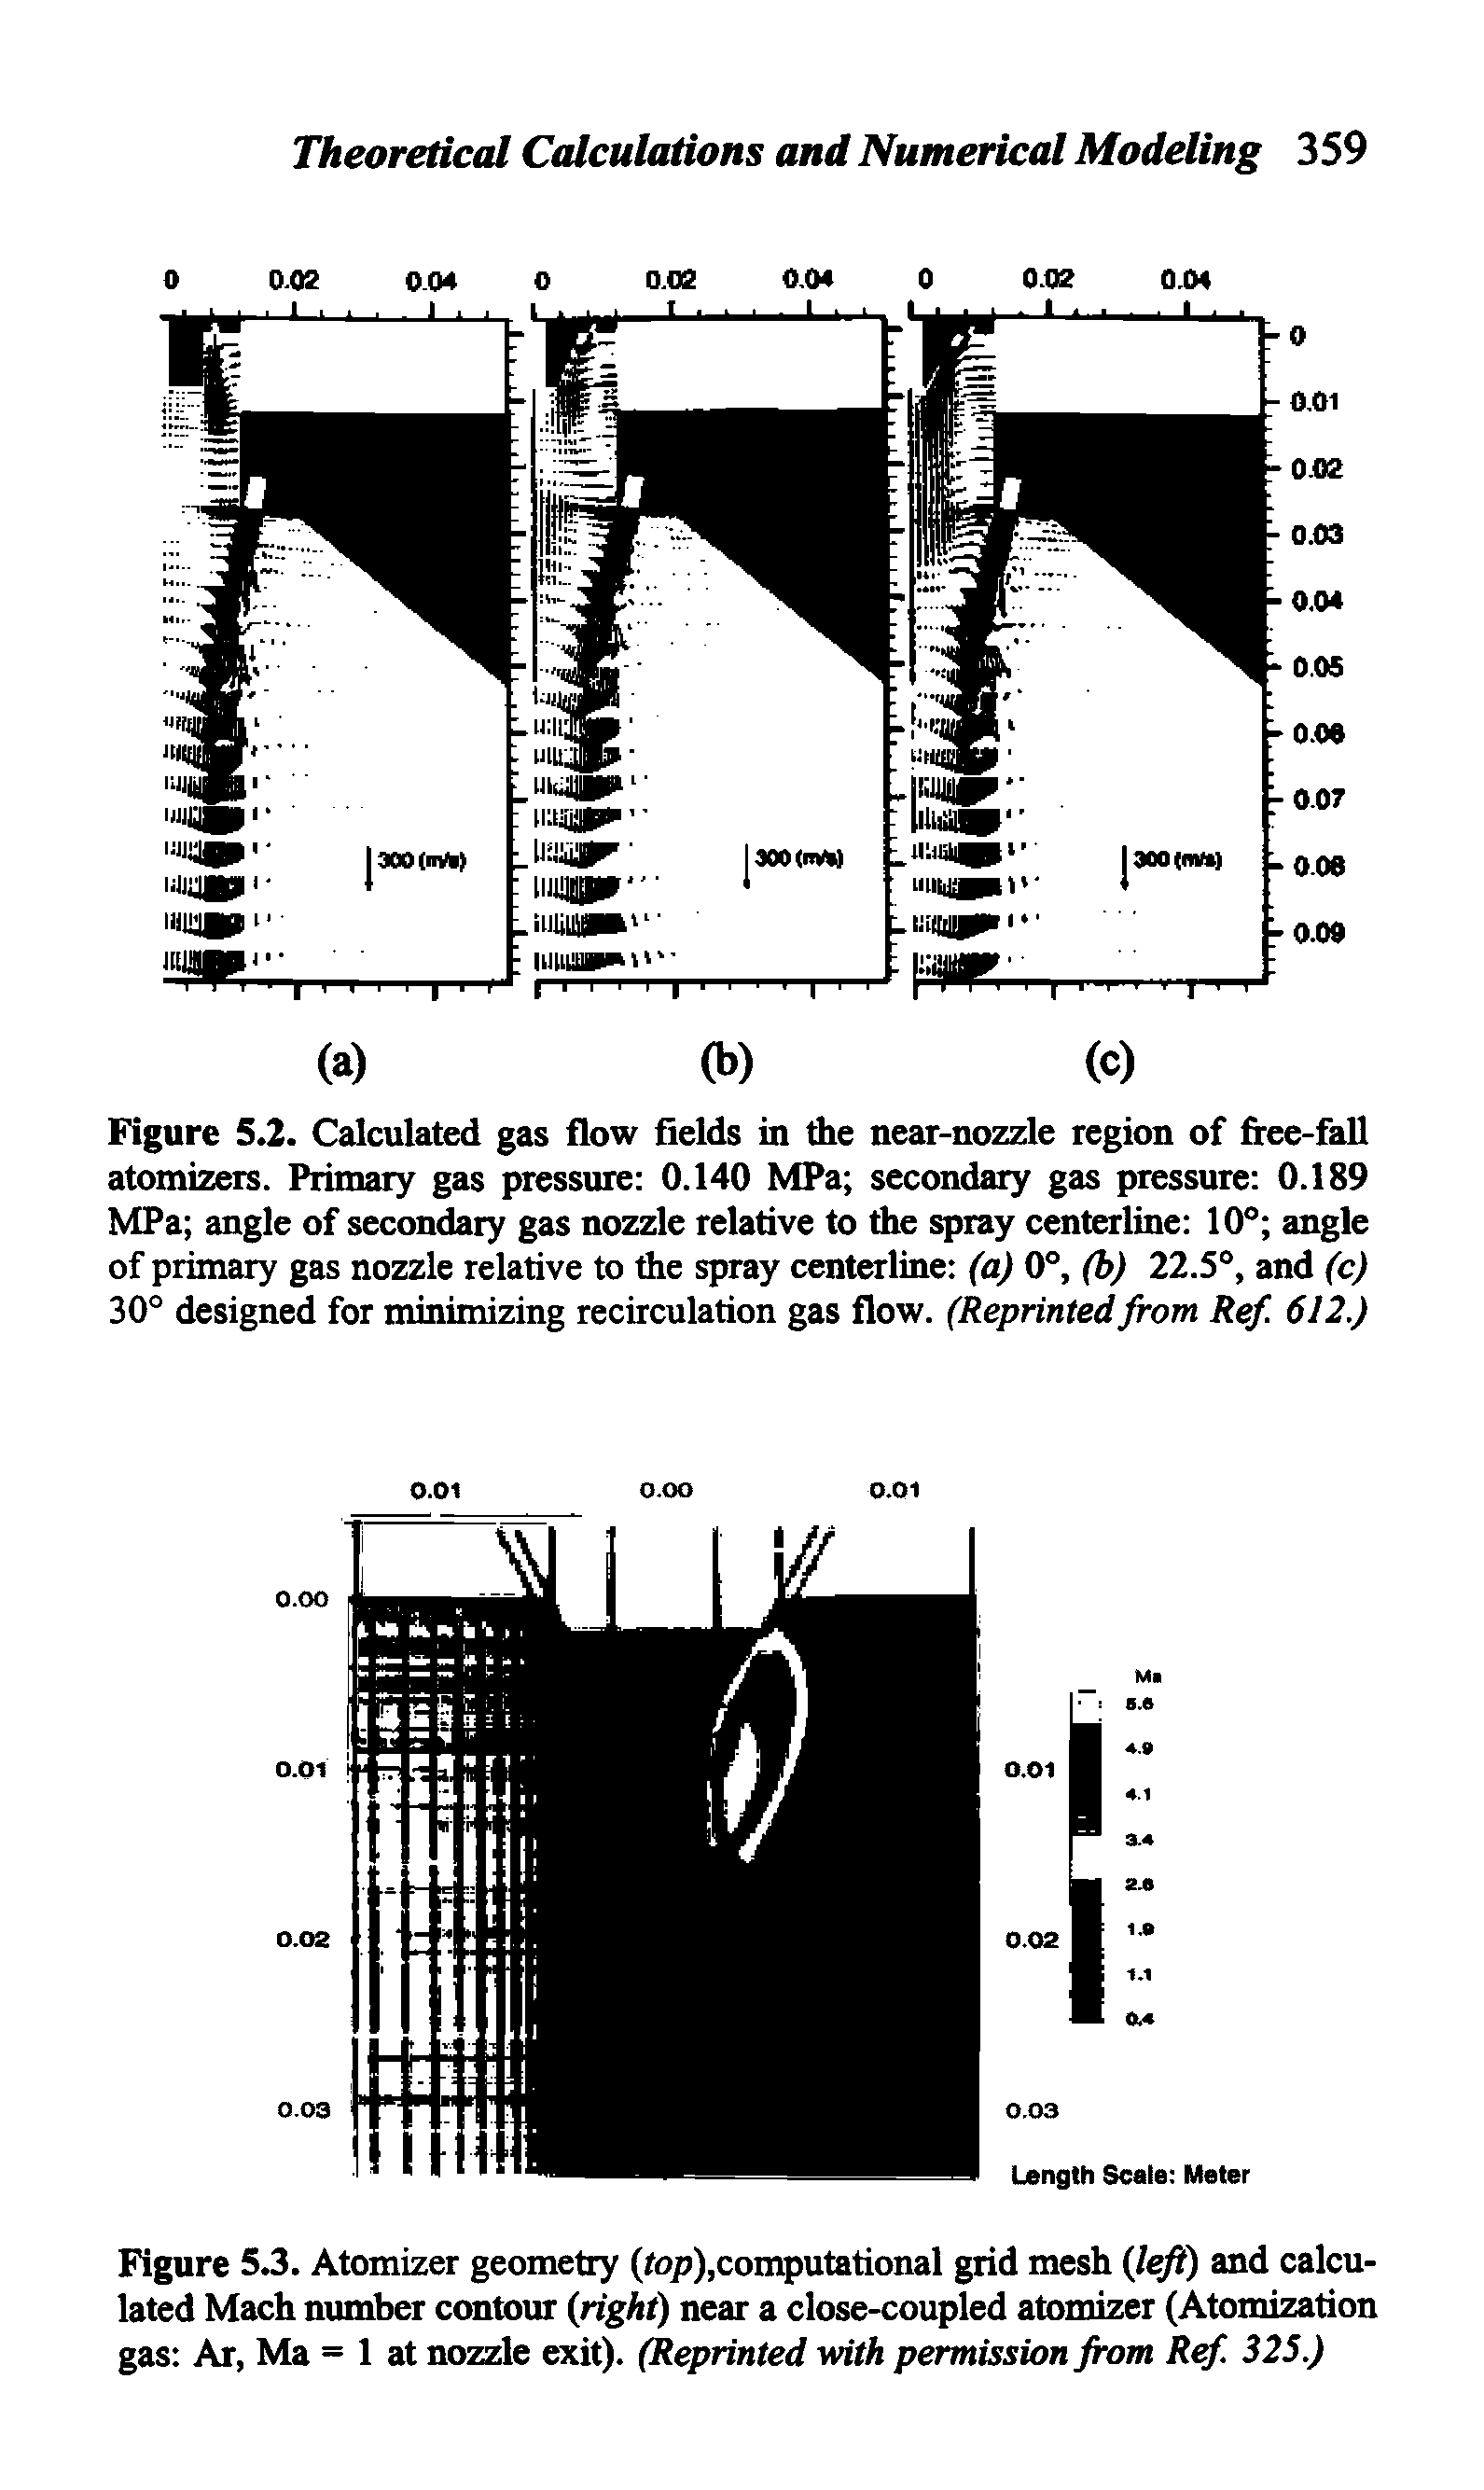 Figure 5.2. Calculated gas flow fields in the near-nozzle region of free-fall atomizers. Primary gas pressure 0.140 MPa secondary gas pressure 0.189 MPa angle of secondary gas nozzle relative to the spray centerline 10° angle of primary gas nozzle relative to the spray centerline (a) 0°, (b) 22.5°, and (c) 30° designed for minimizing recirculation gas flow. (Reprinted from Ref. 612.)...